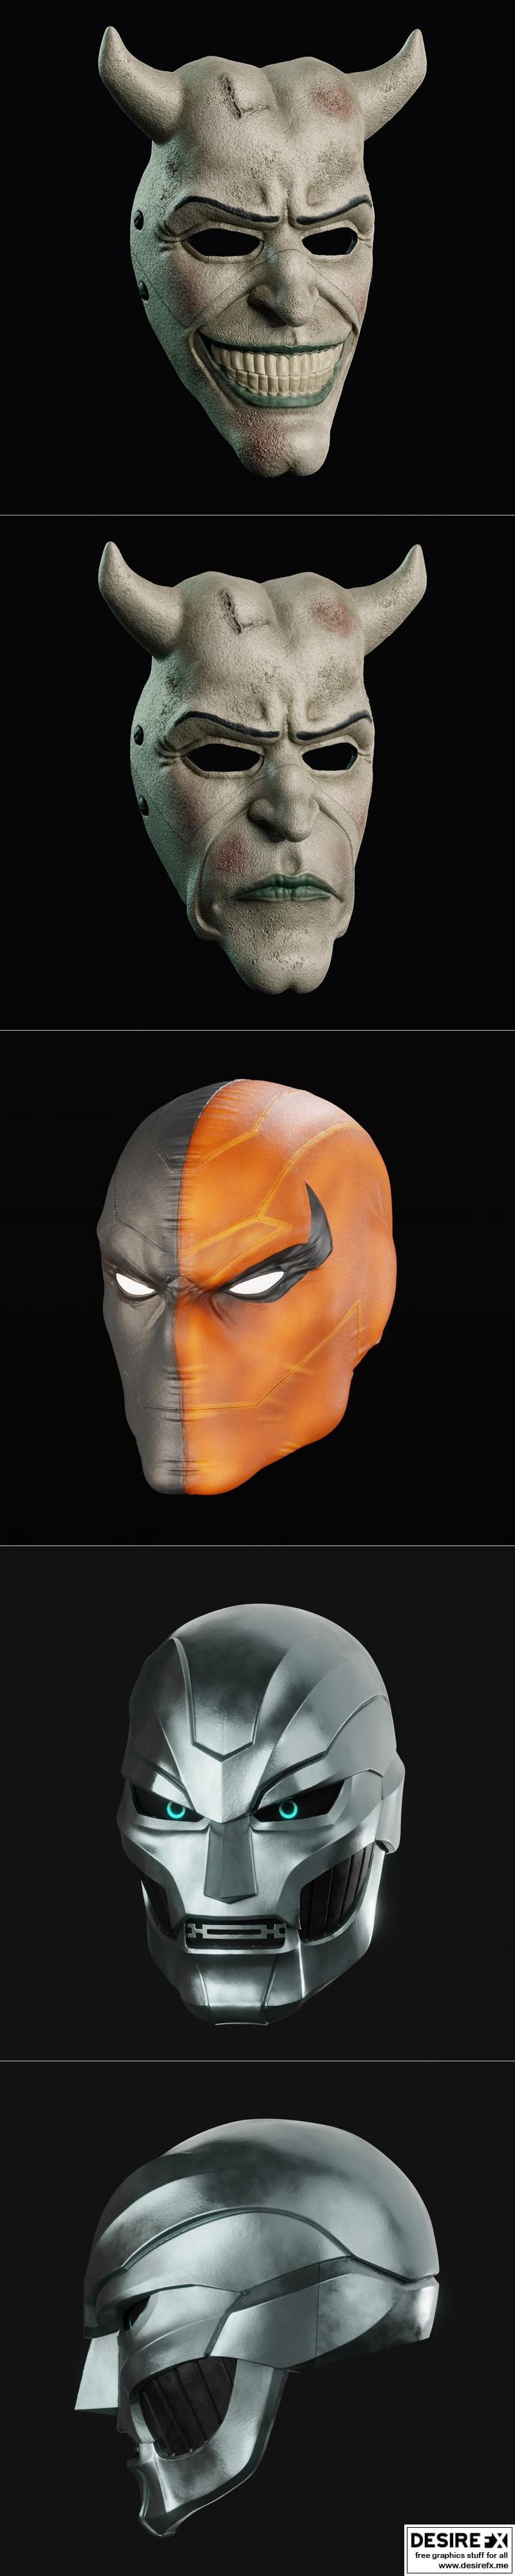 Desire FX 3d models | Black Phone Mask and Deathstroke Mask normal and ...